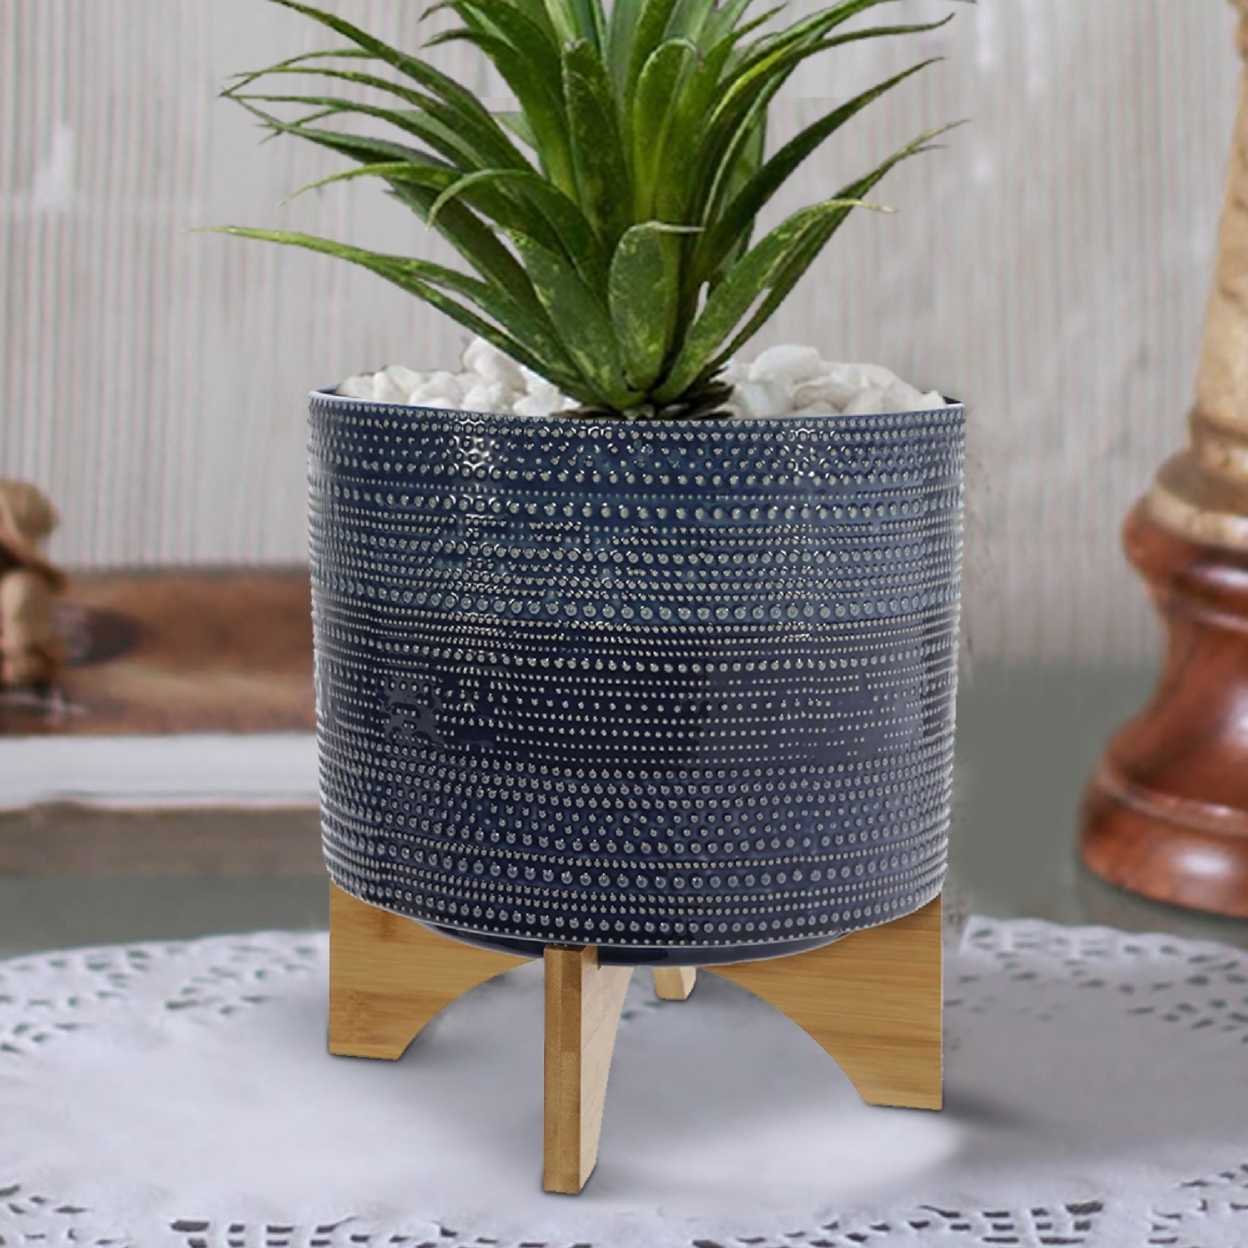 11 Inch Ceramic Dotted Planter With Wooden Base, Blue And Brown- Saltoro Sherpi